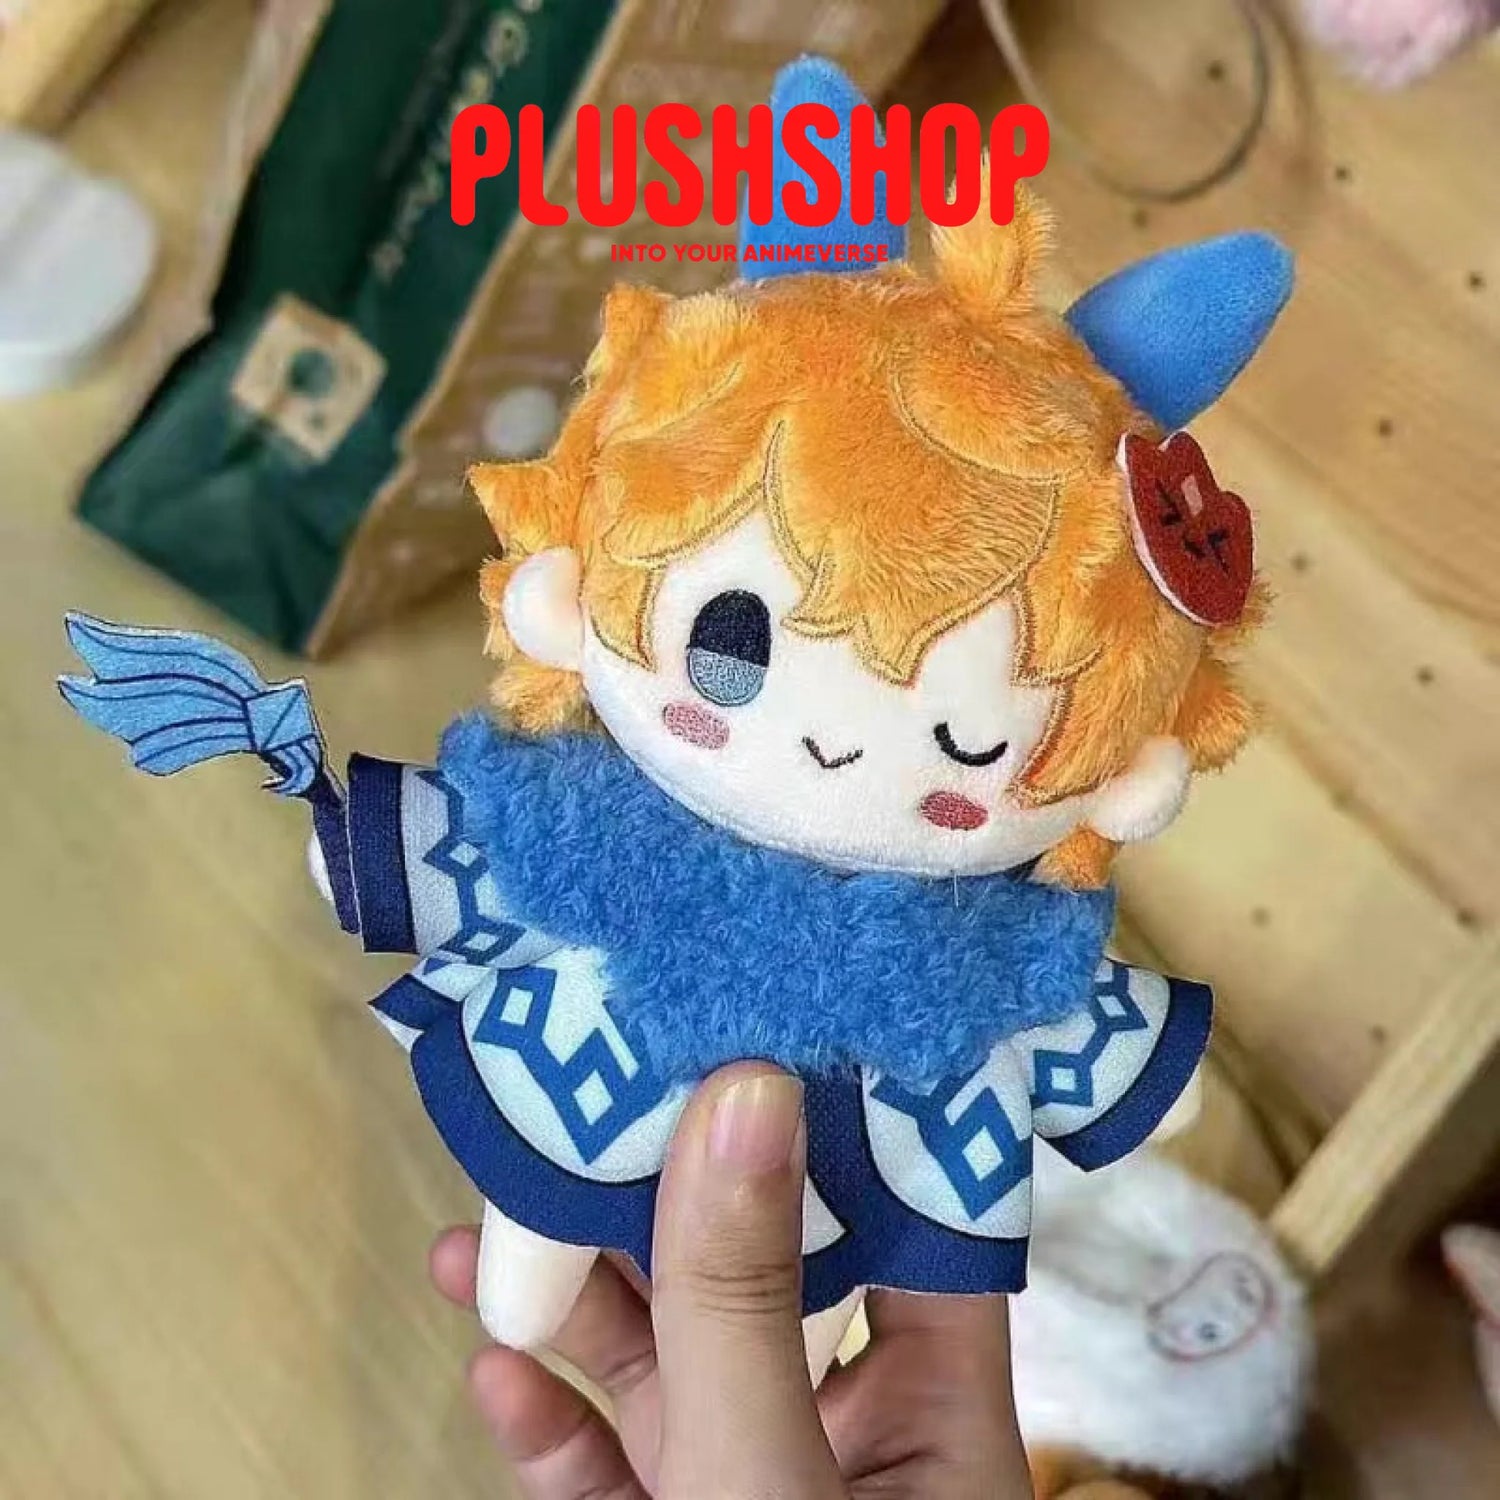 12Cm Genshin Impact Characters Abyss Mage Cute Plush Keychainpre-Order Ship Within 30 Days)